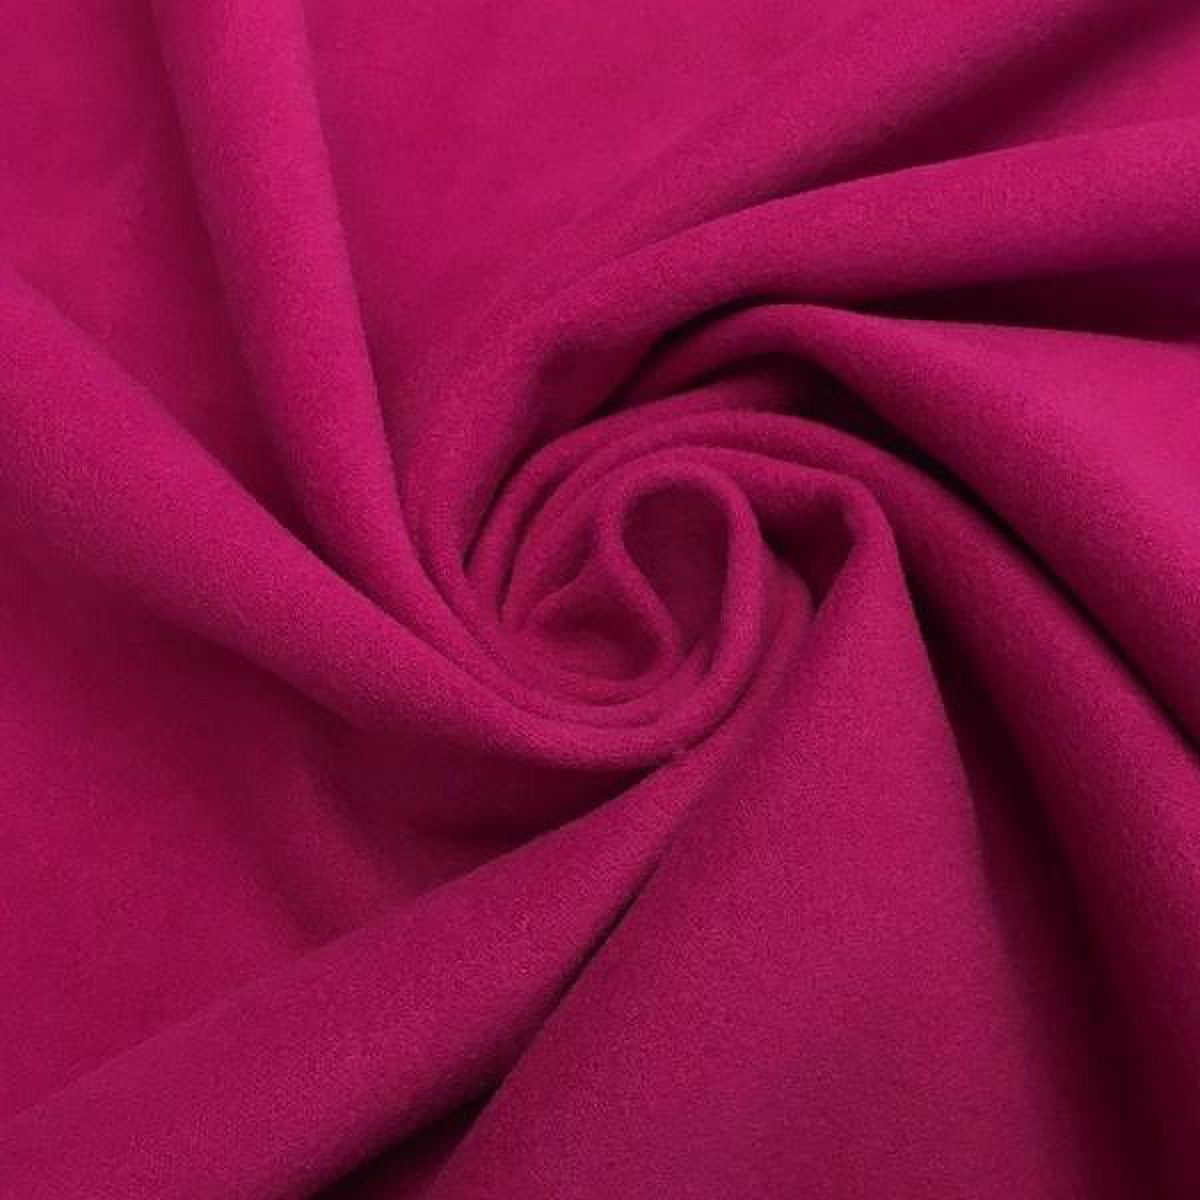 Polyester Wool Fabric Brushed Coating 59 inches Wide Soft By The Yard  Medium Heavy Weight (Red)